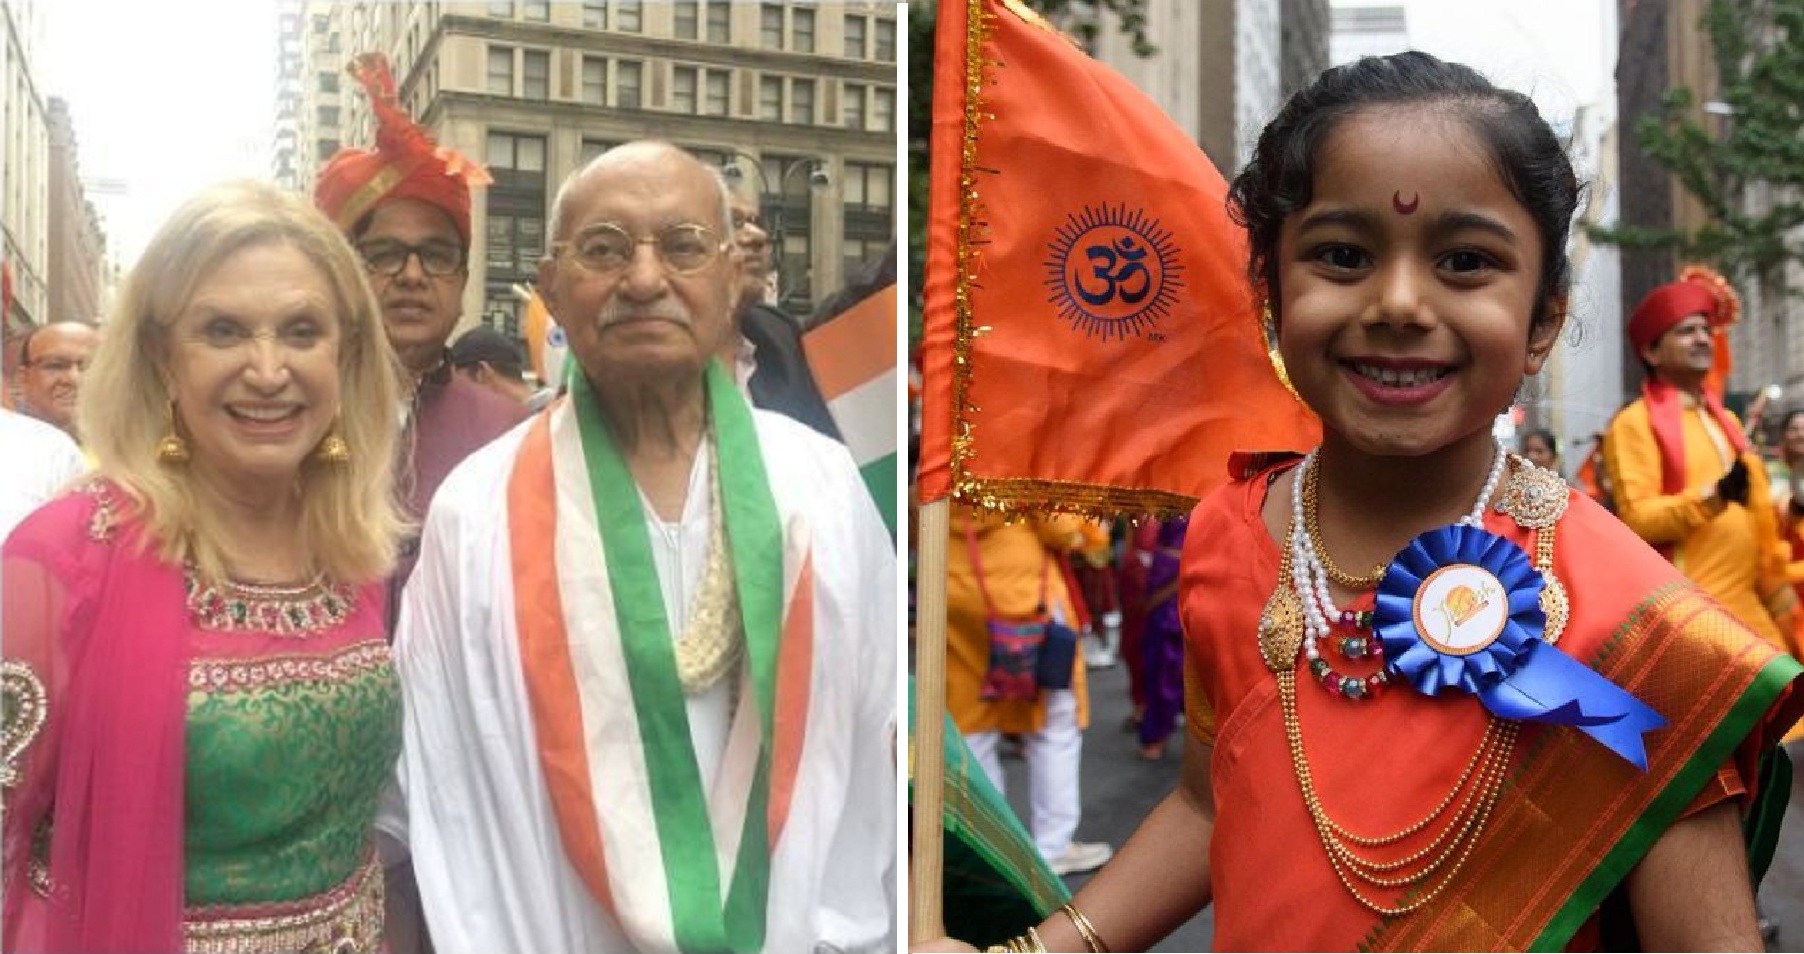 Over 1.5 Lakh NRI’s Marched in New York to Celebrate India’s Independence Day. See Pics.